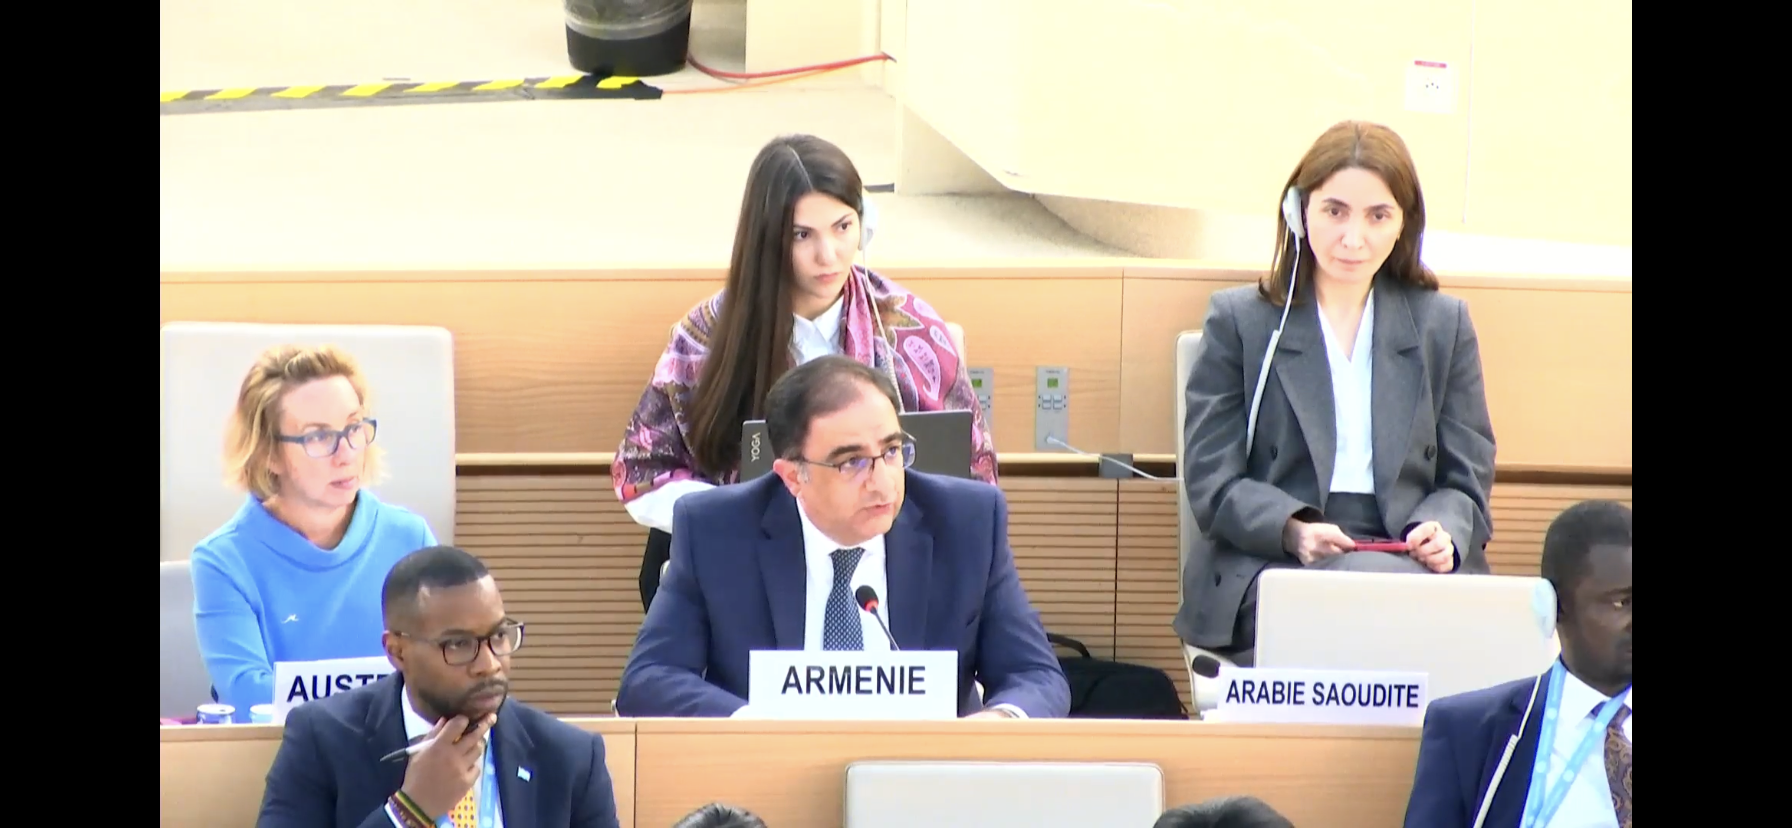 Statement  on the draft resolution “Prevention of Genocide”  delivered by H.E. Andranik Hovhannisyan, Permanent Representative of Armenia ` at the 55th Session of the UN Human Rights Council